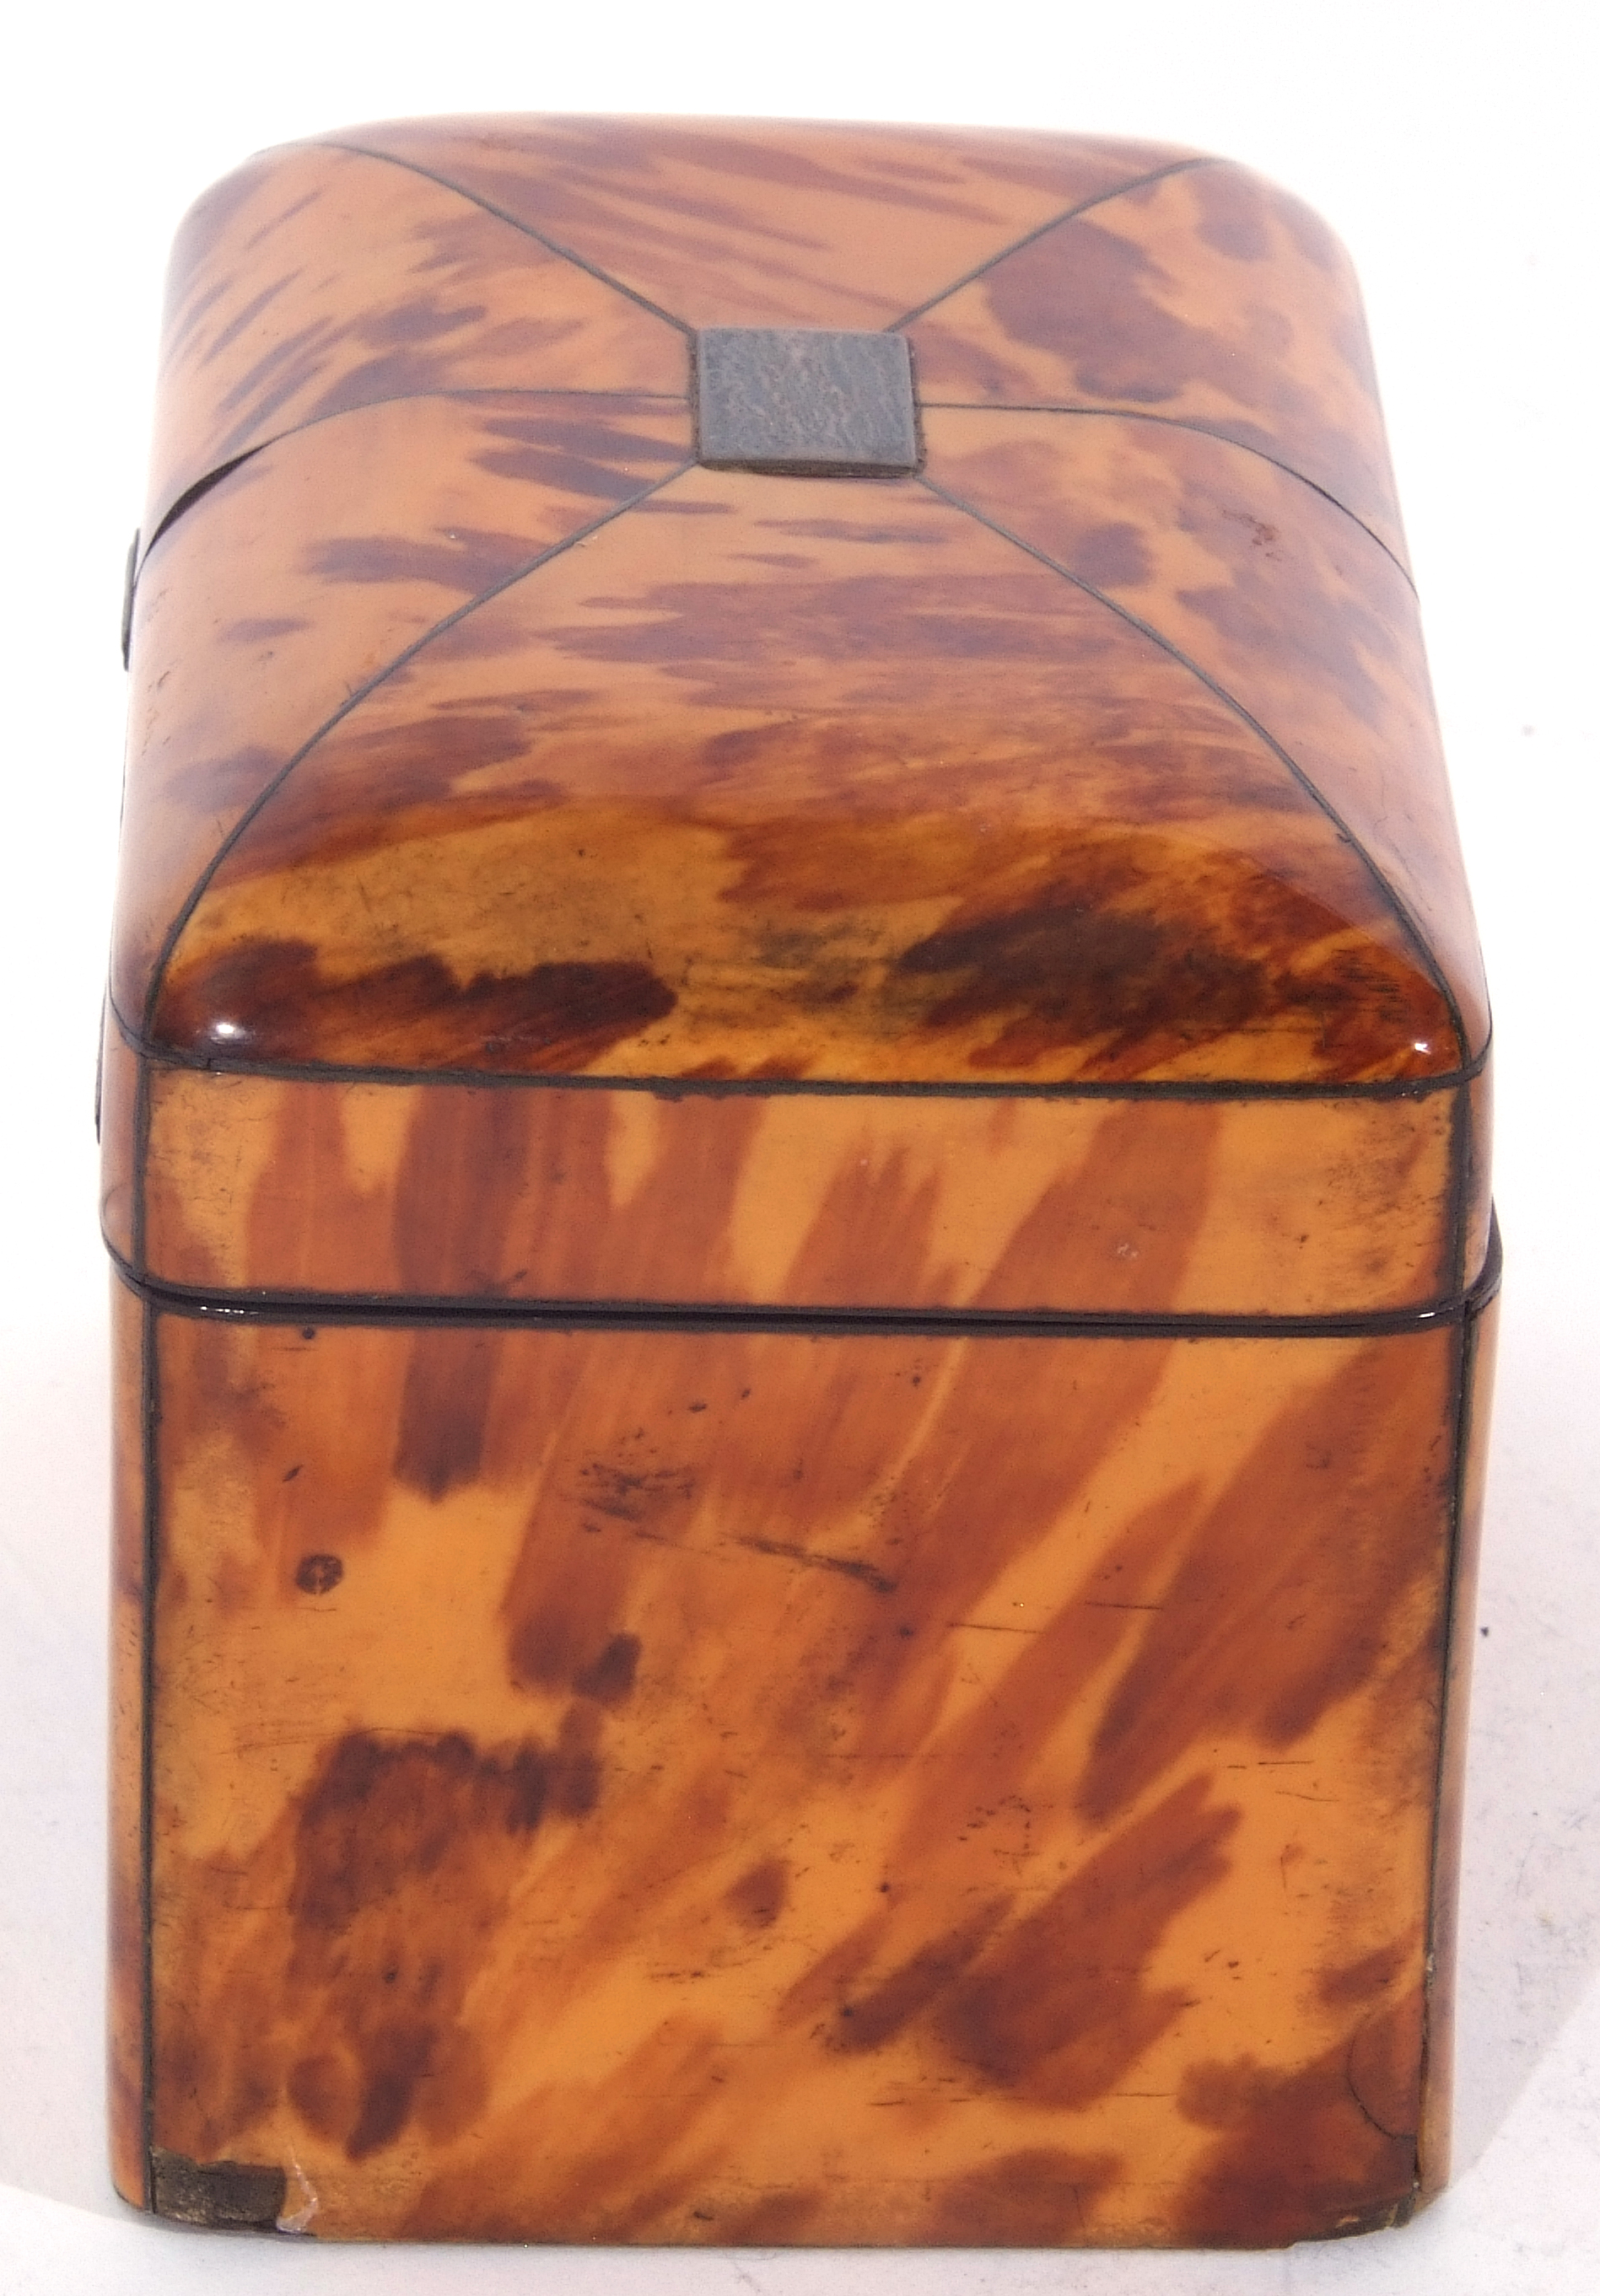 Mid-19th century tortoiseshell veneered tea caddy with pewter divisional inlays, the lid opening - Image 10 of 11